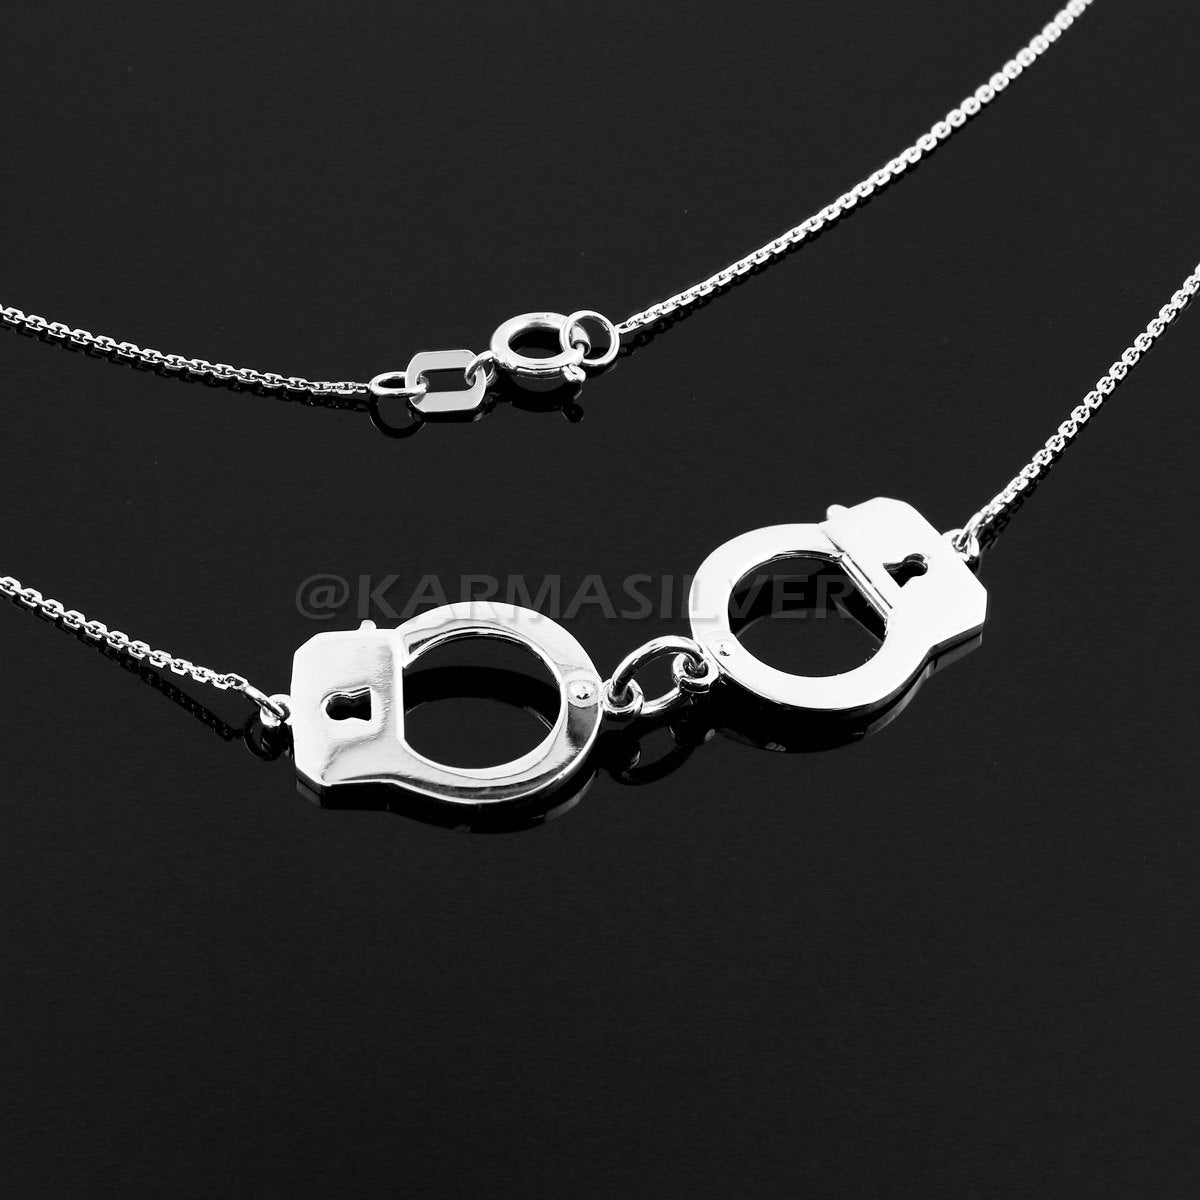 Sterling Silver Handcuffs Necklaces Karma Blingz